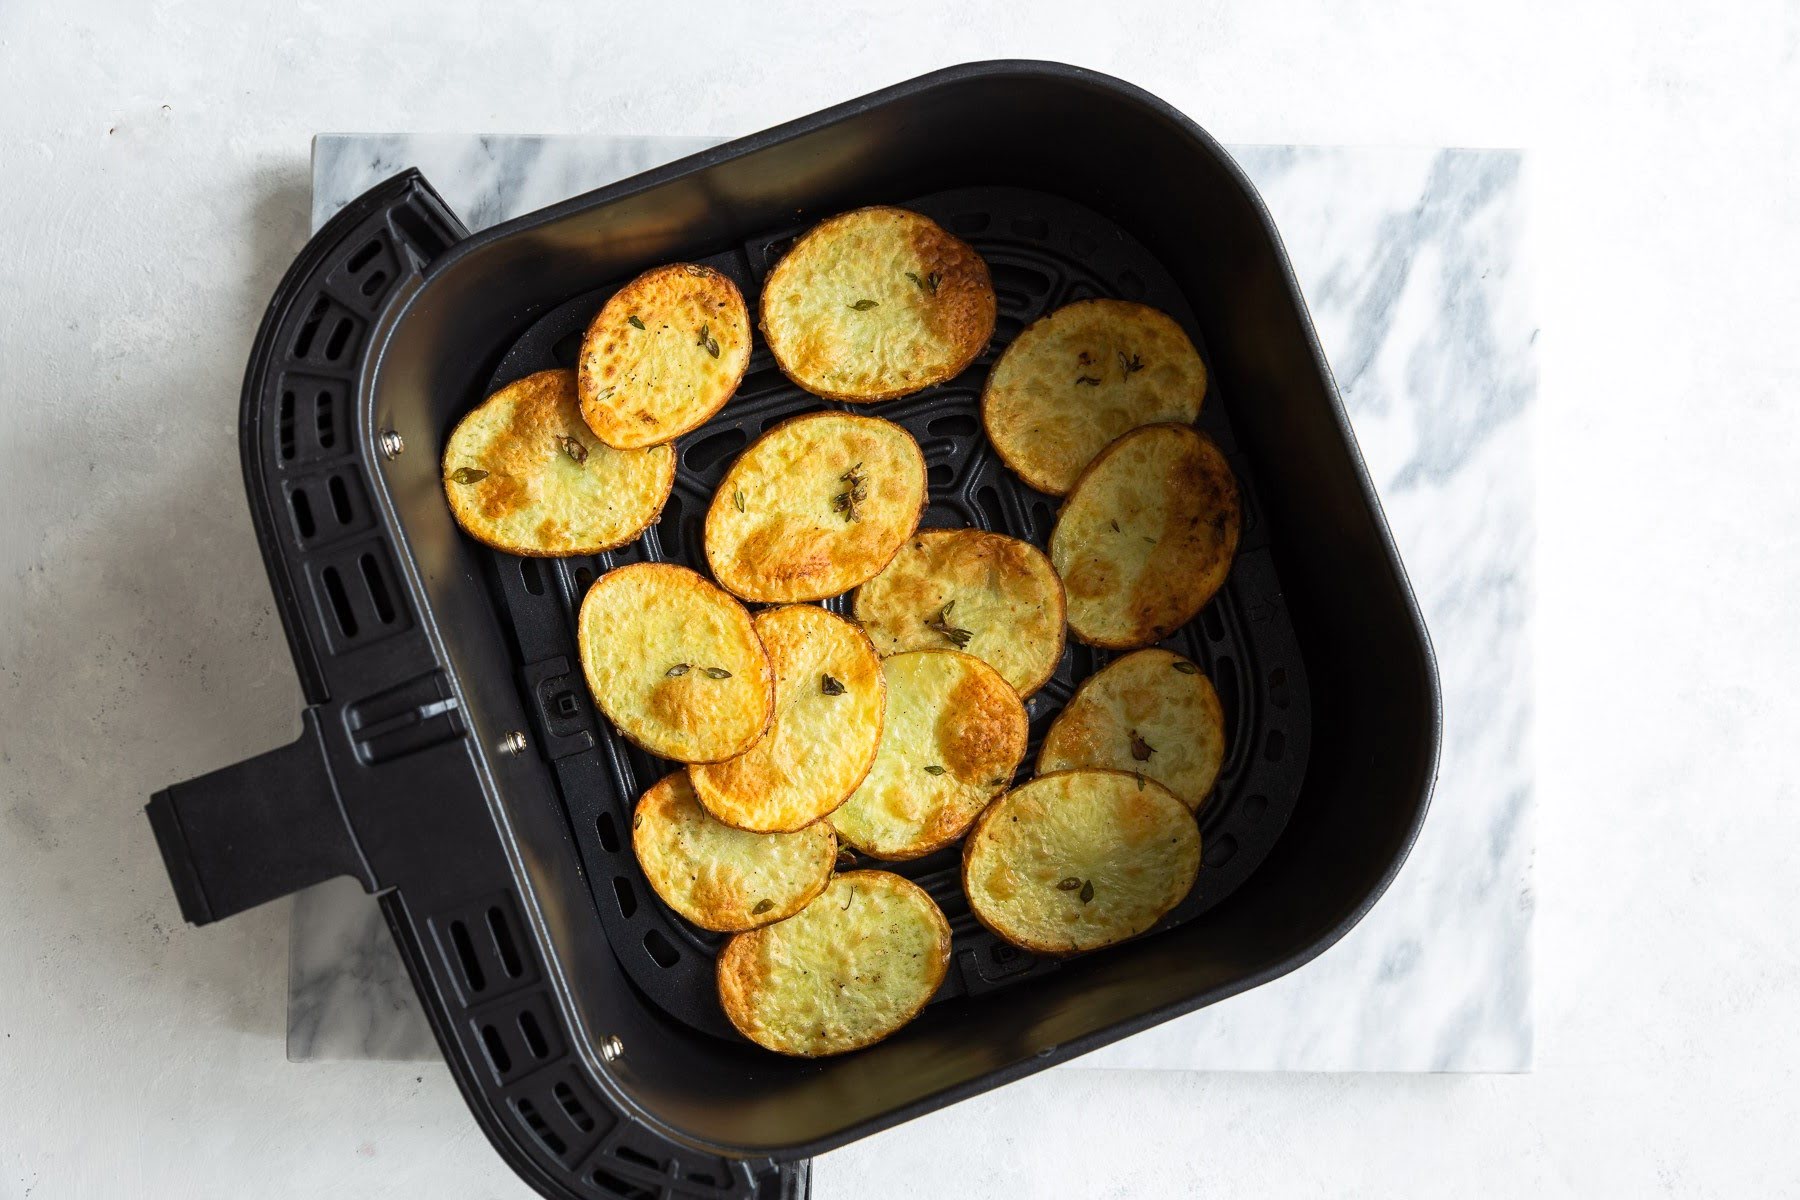 How To Cook Sliced Potatoes In Air Fryer